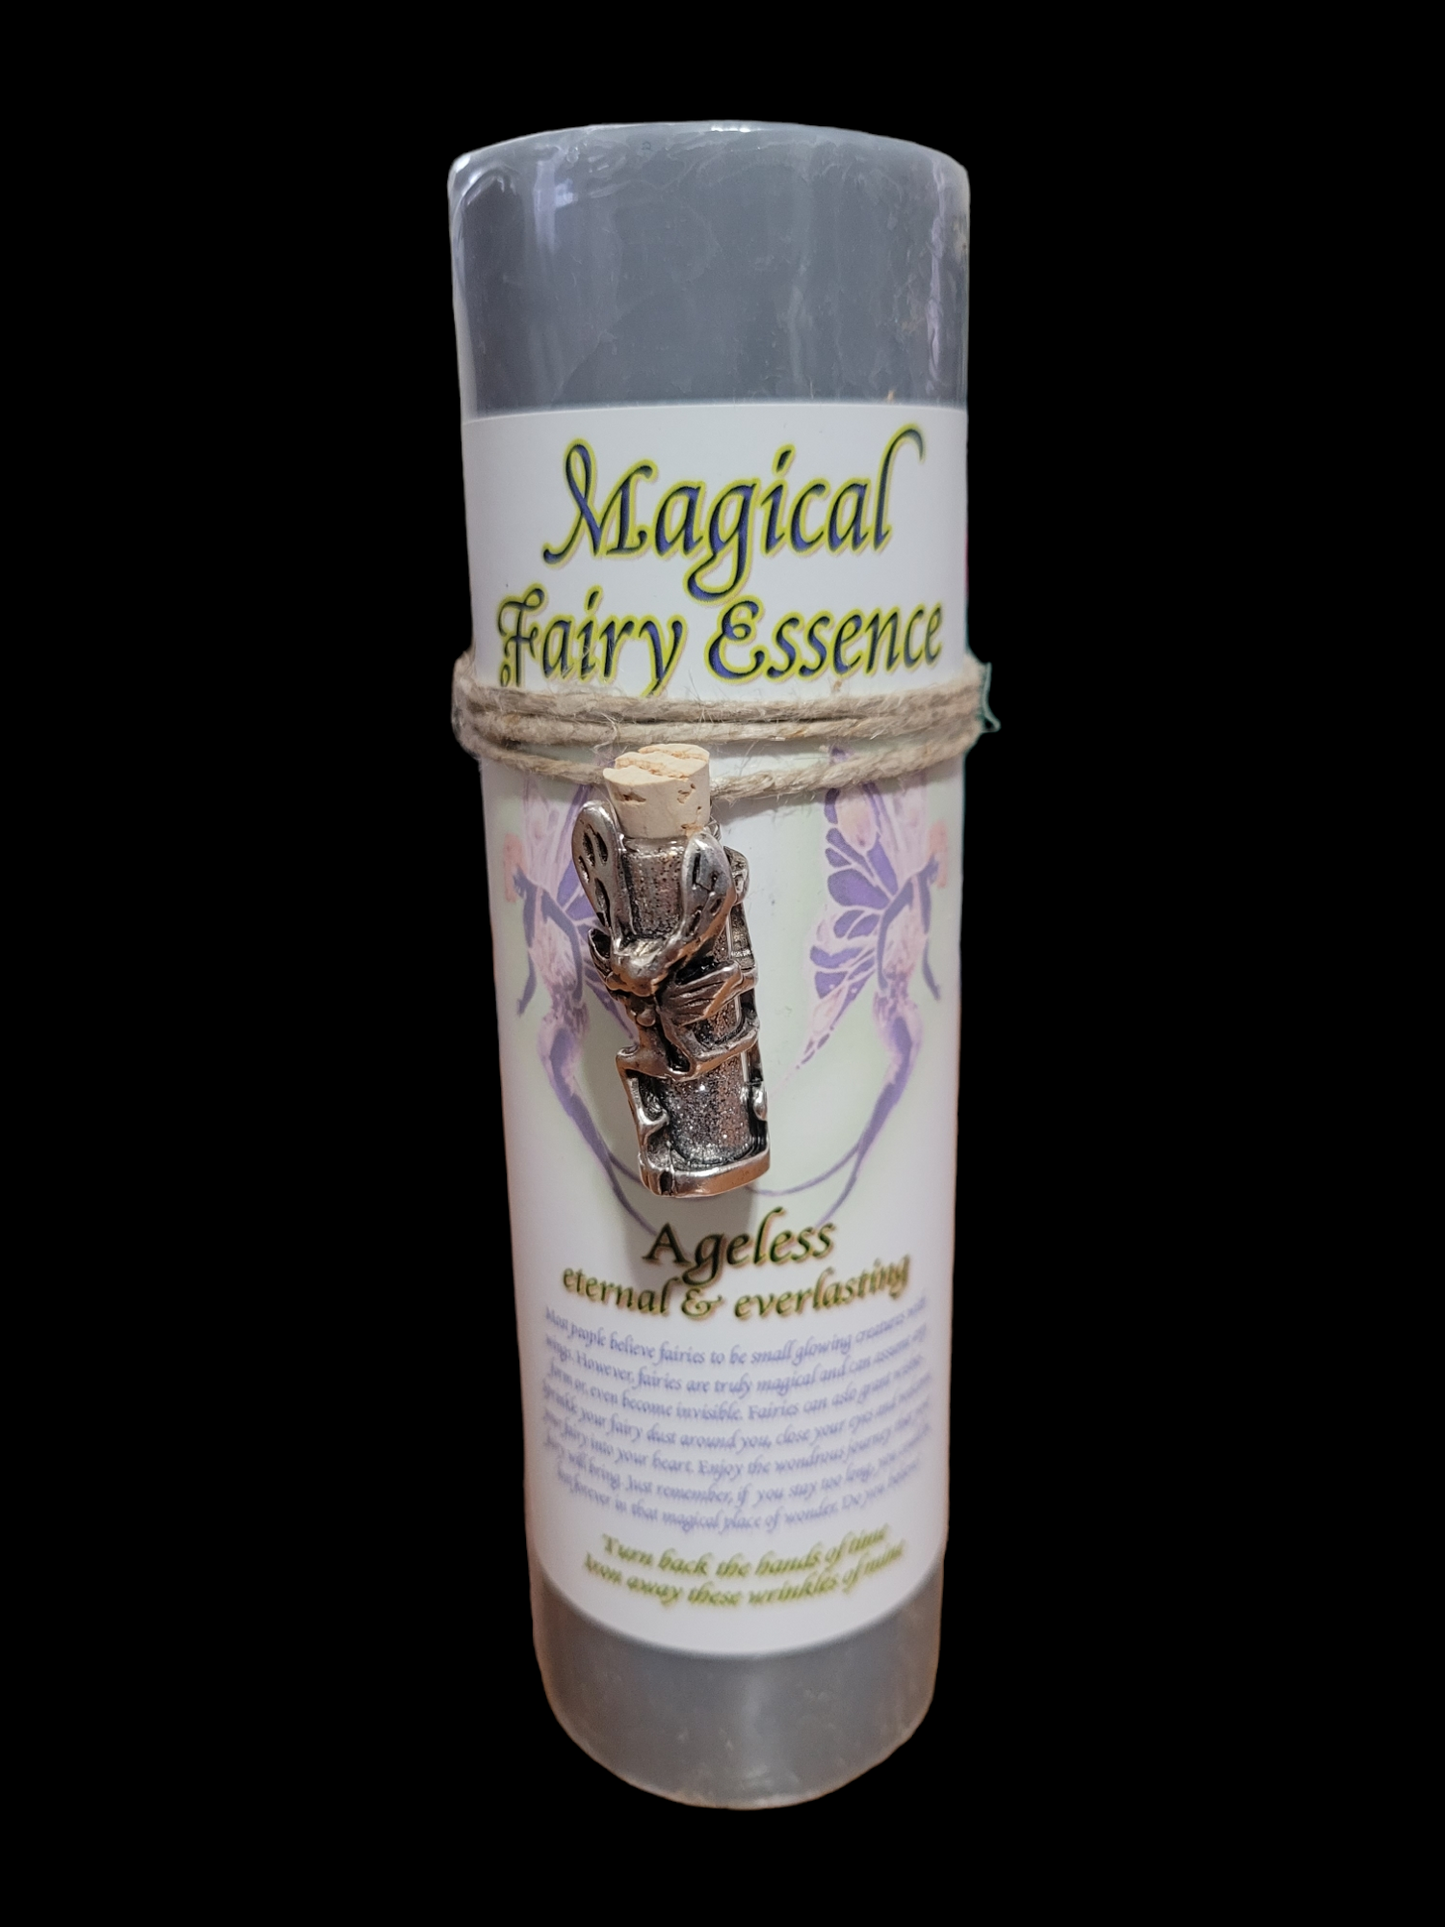 Magical Fairy Essence Candles